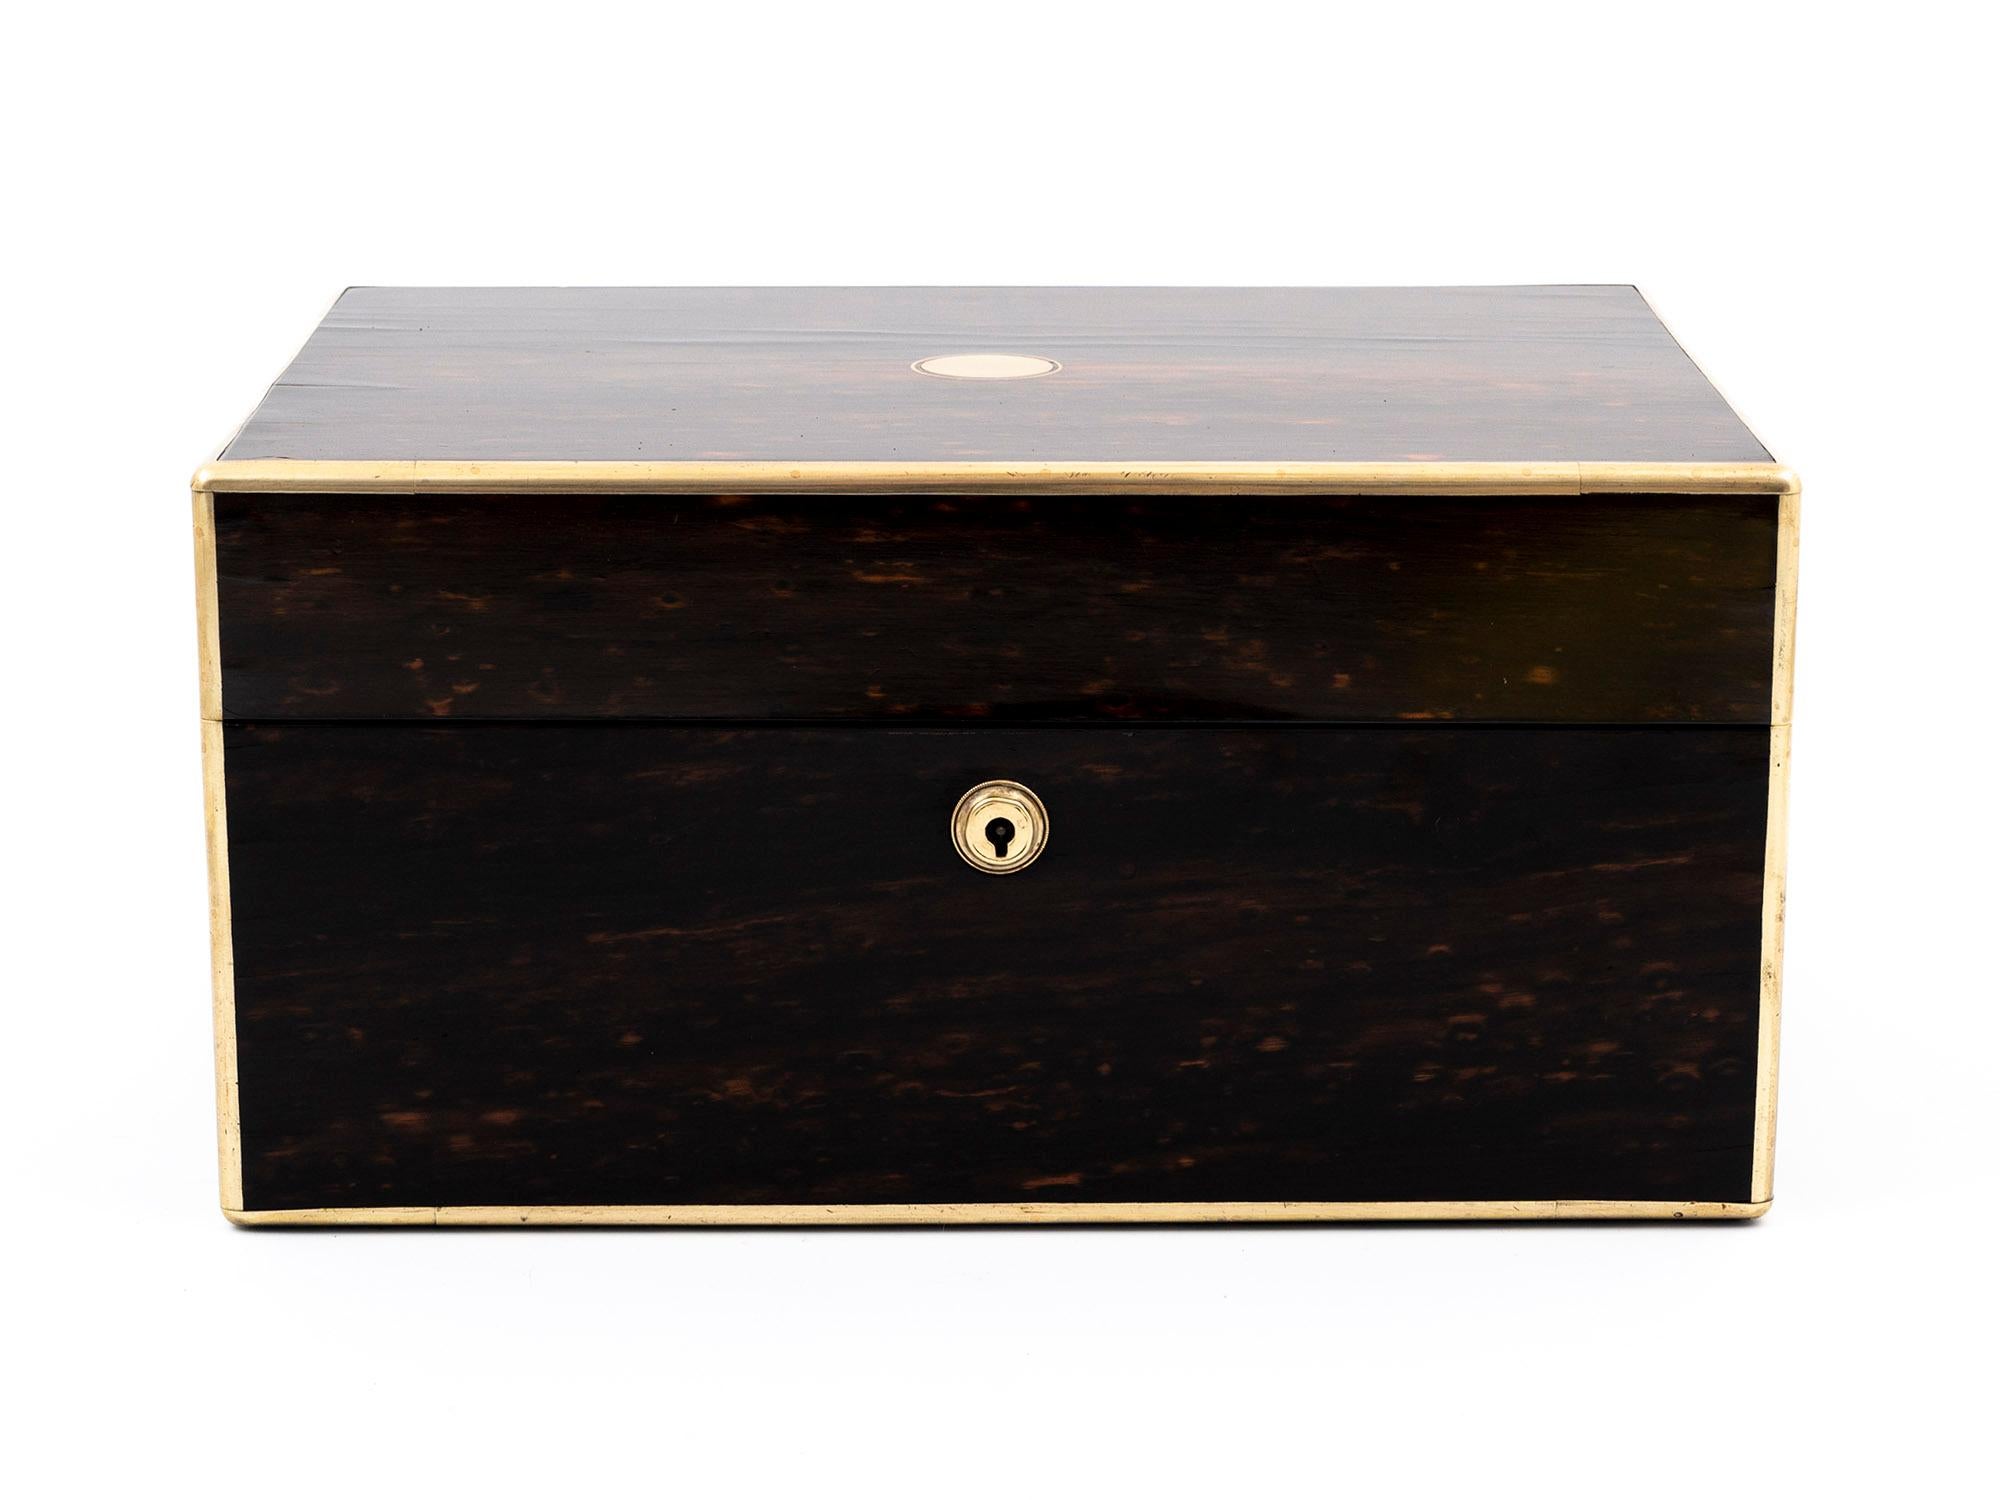 A secret jewellery drawer and love letter compartment is inside this beautiful antique coromandel jewellery box. This box has quadrant brass edging, sturdy flush-fitting carry handles, a vacant initial plate on the top, and an escutcheon on the